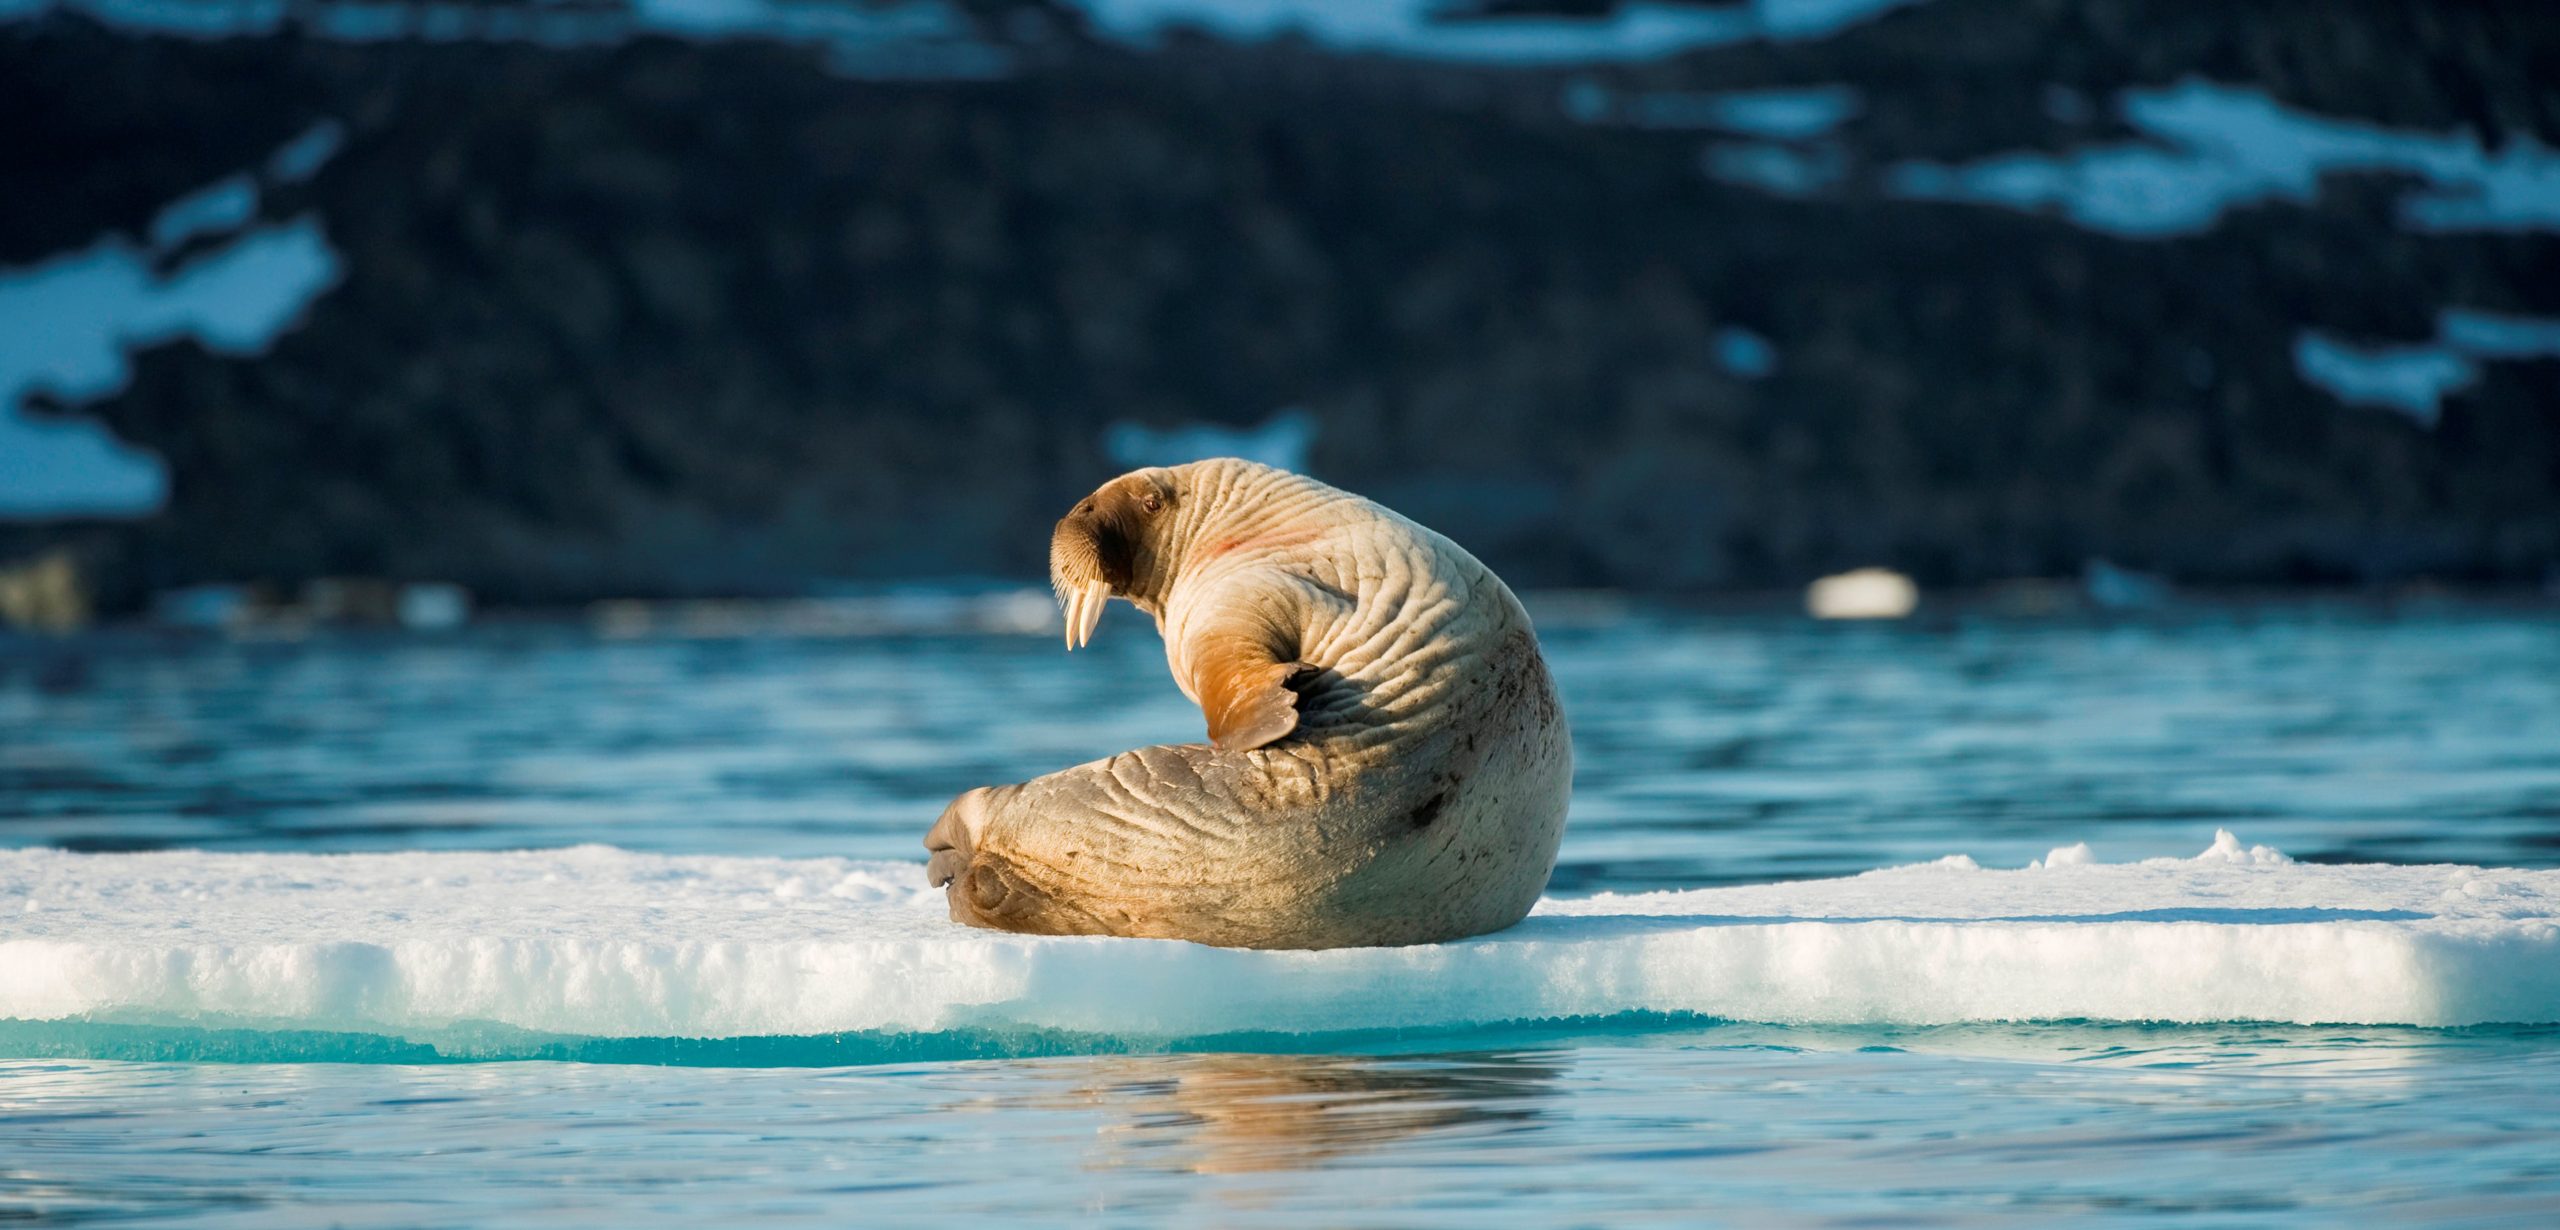 A young male walrus sits on an ice floe off Spitsbergen, Norway. Photo by Steven Kazlowski/SuperStock/Corbis